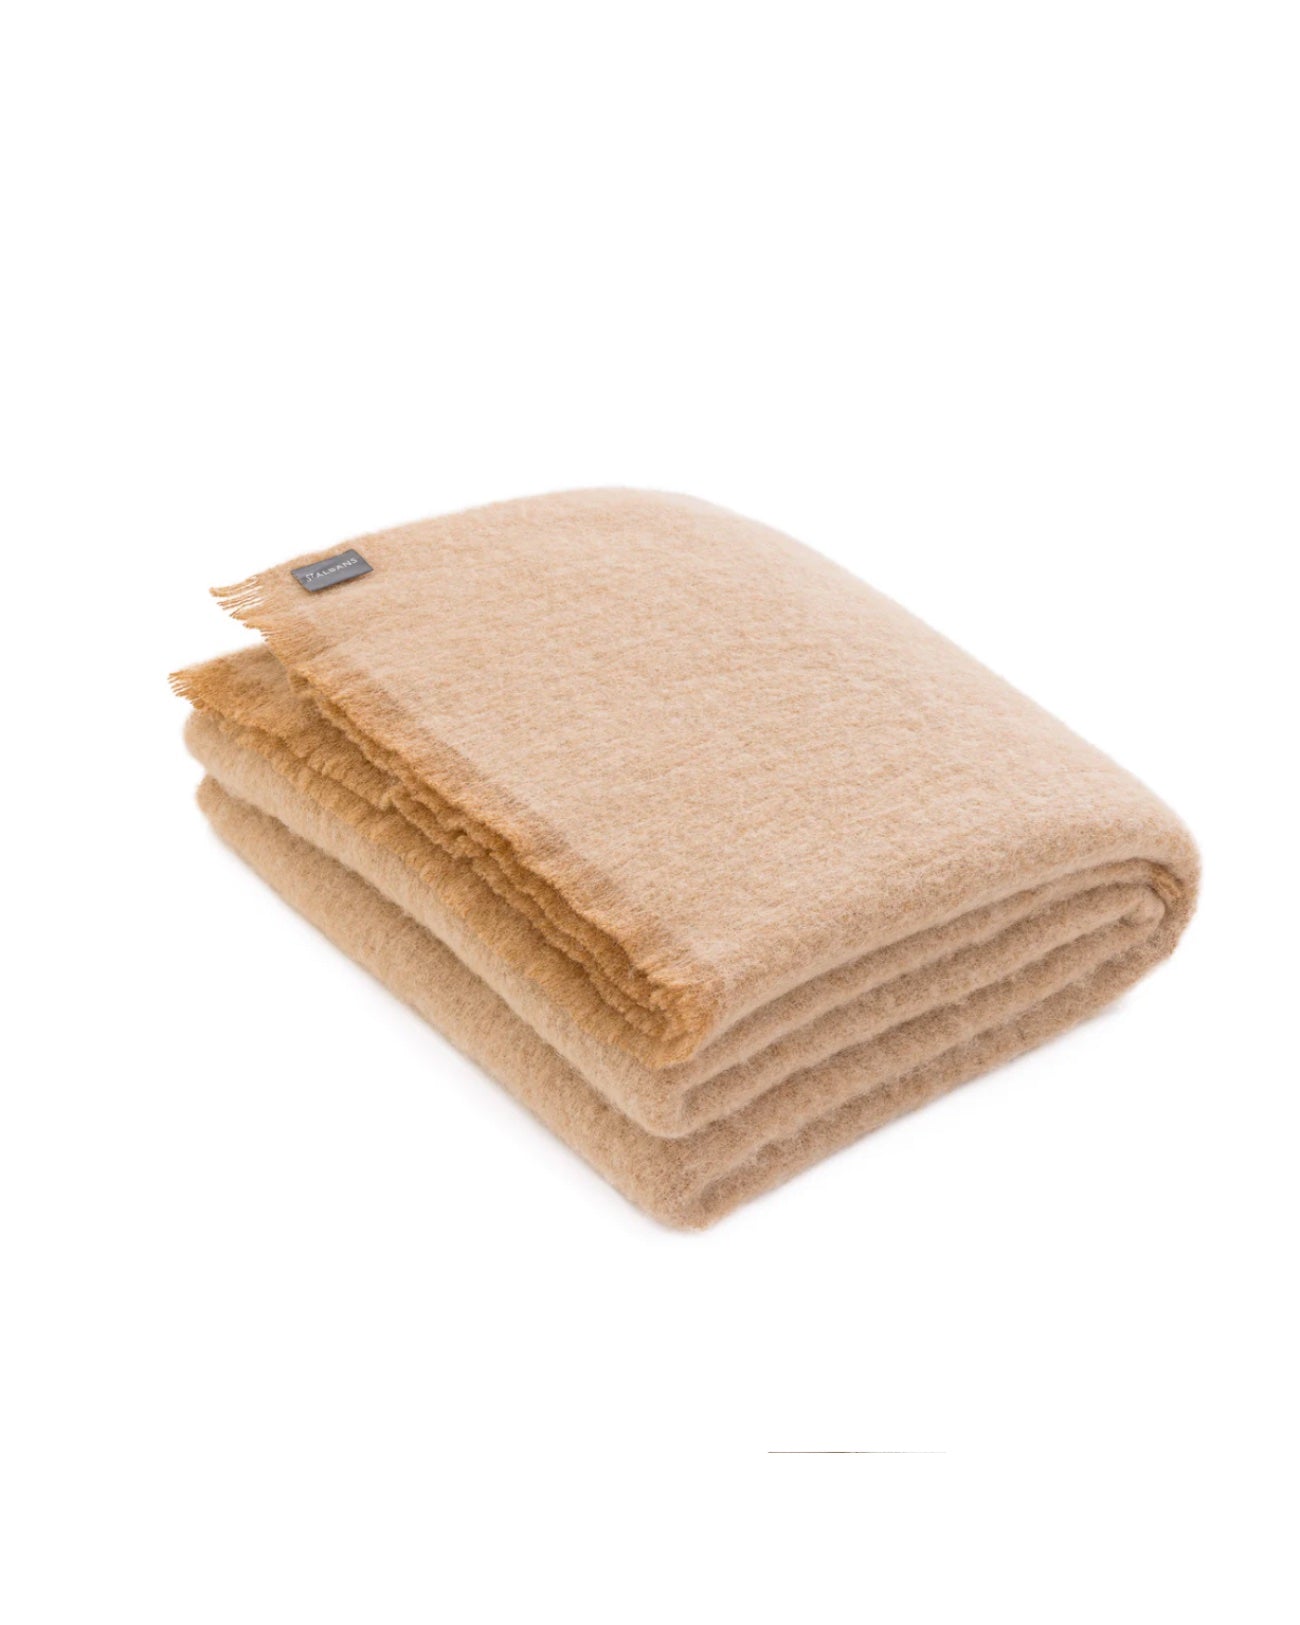 Soft, supple and luxuriant, these gorgeous Alpaca Throws are fashioned for comfort and contentment. Beautifully breathable, hypoallergenic and naturally water repellent, the famous wool of the Huacaya Alpaca is sourced from the highest farming region of Peru. Available in Oyster, Atlantic Blue and Walnut.